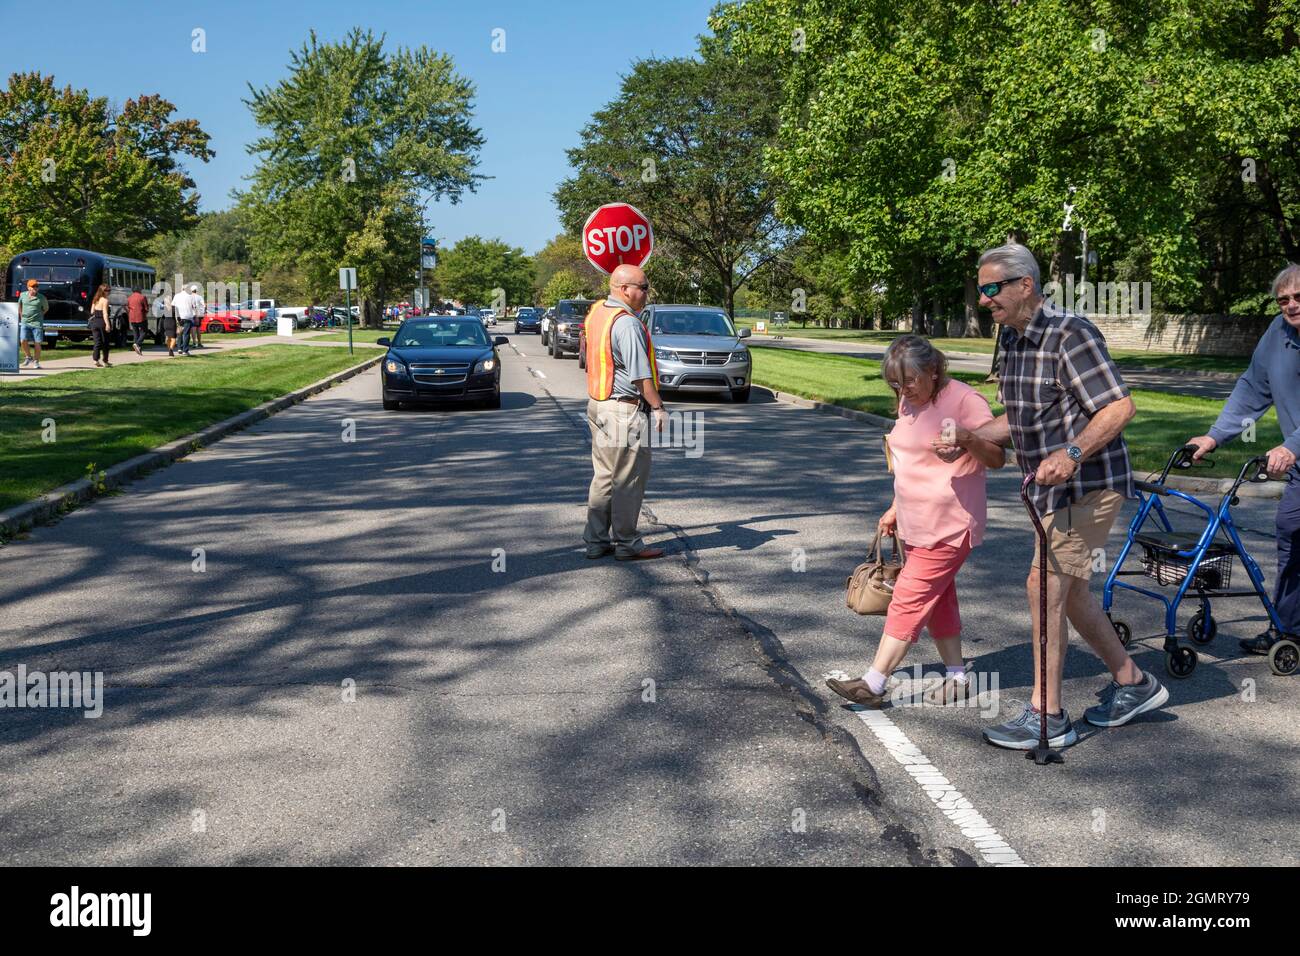 Grosse Pointe Shores, Michigan - A crossing guard stops traffic for pedestrians attending the Eyes on Design auto show at the Edsel & Eleanor Ford Hou Stock Photo